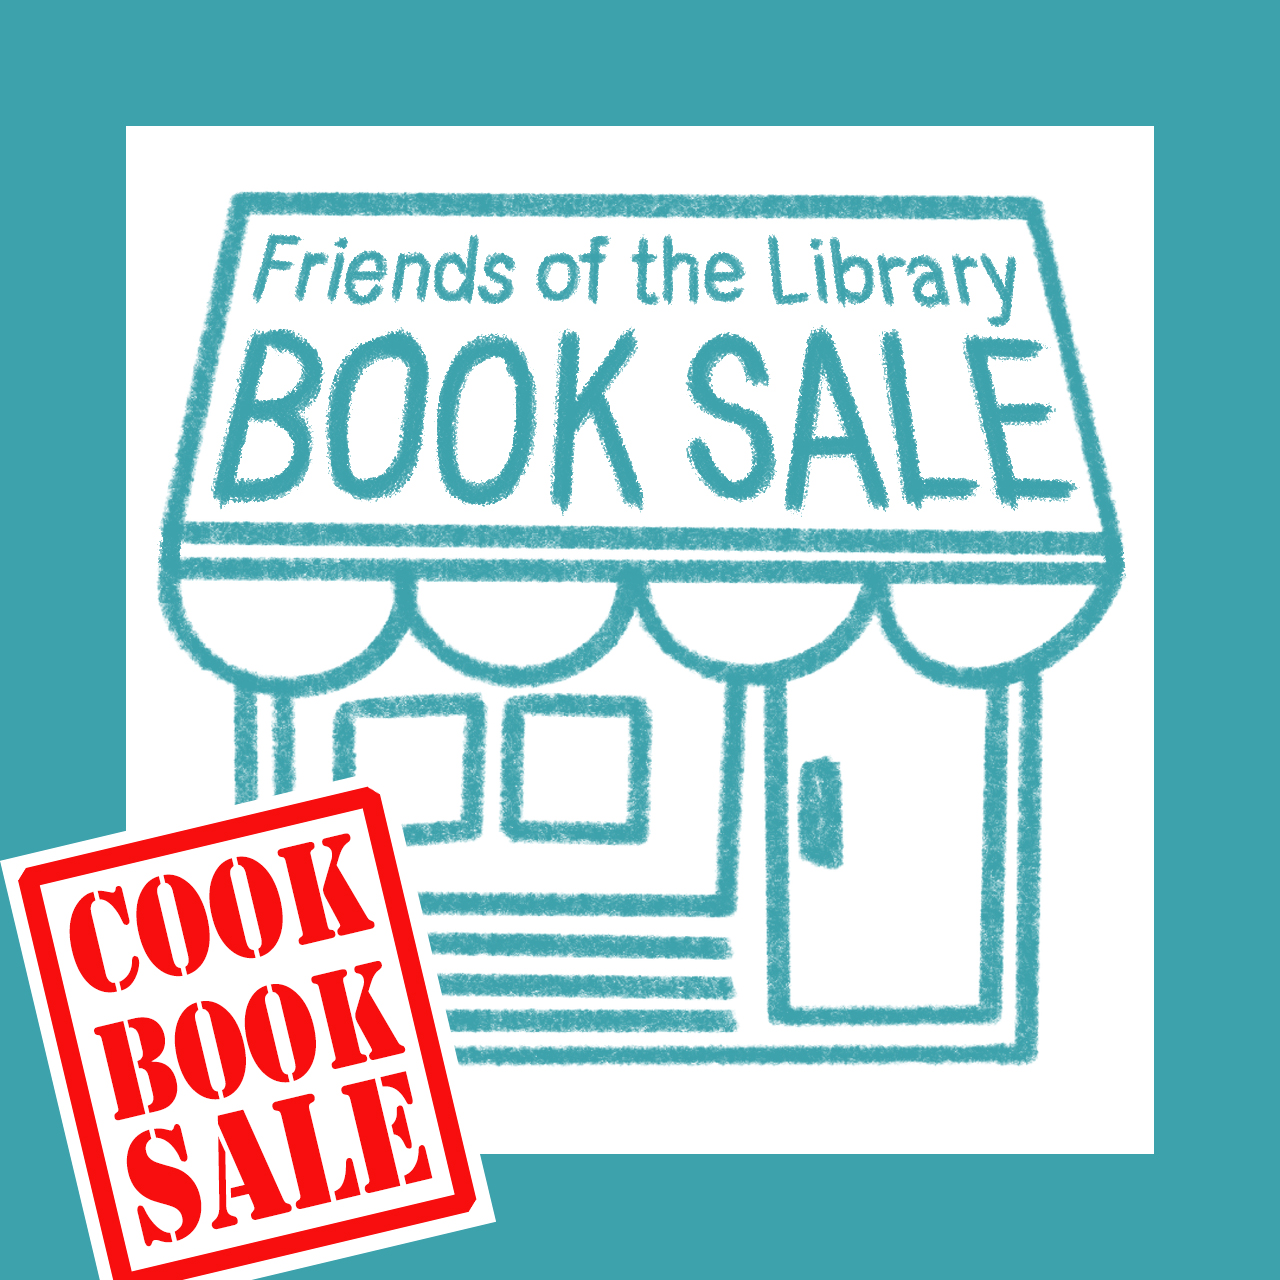 A crayon drawing, in teal, of a shop front whose awning reads "Friends of the Library book sale." Superimposed: a red and white rectangle reading "Cook book sale."